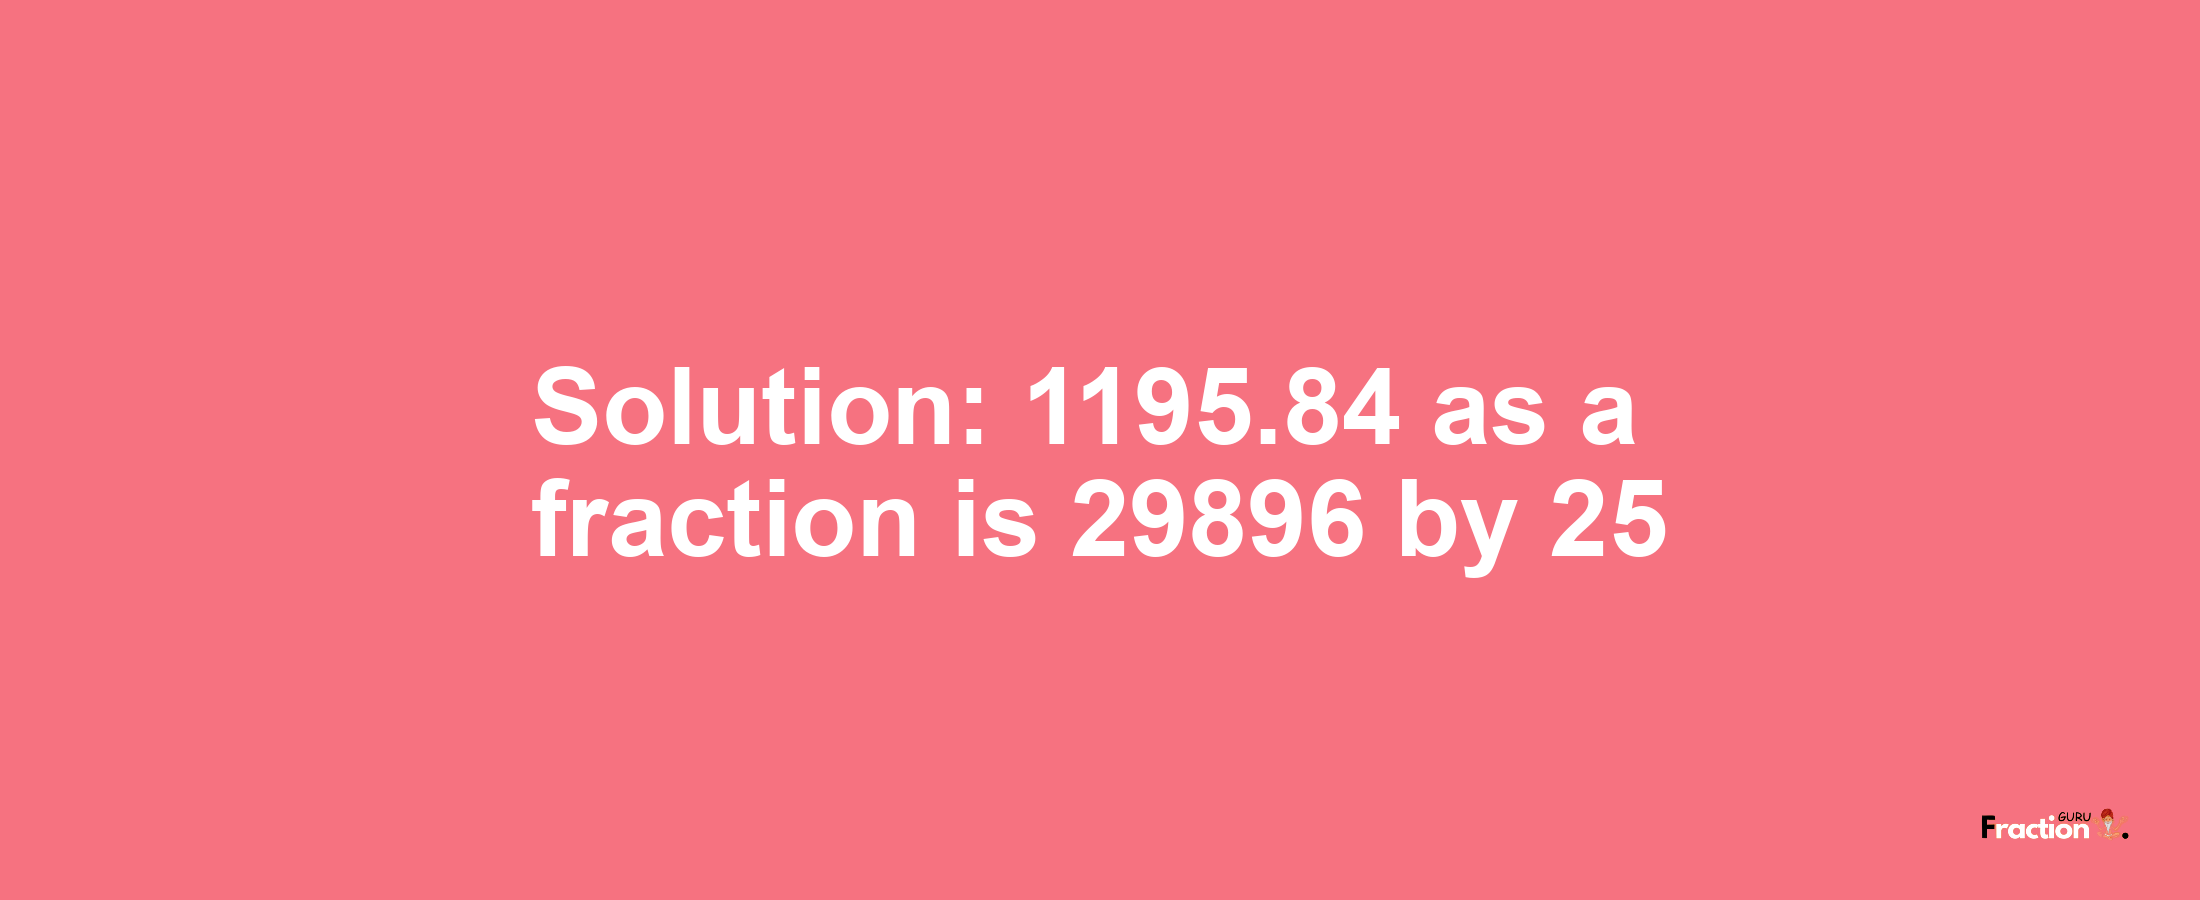 Solution:1195.84 as a fraction is 29896/25